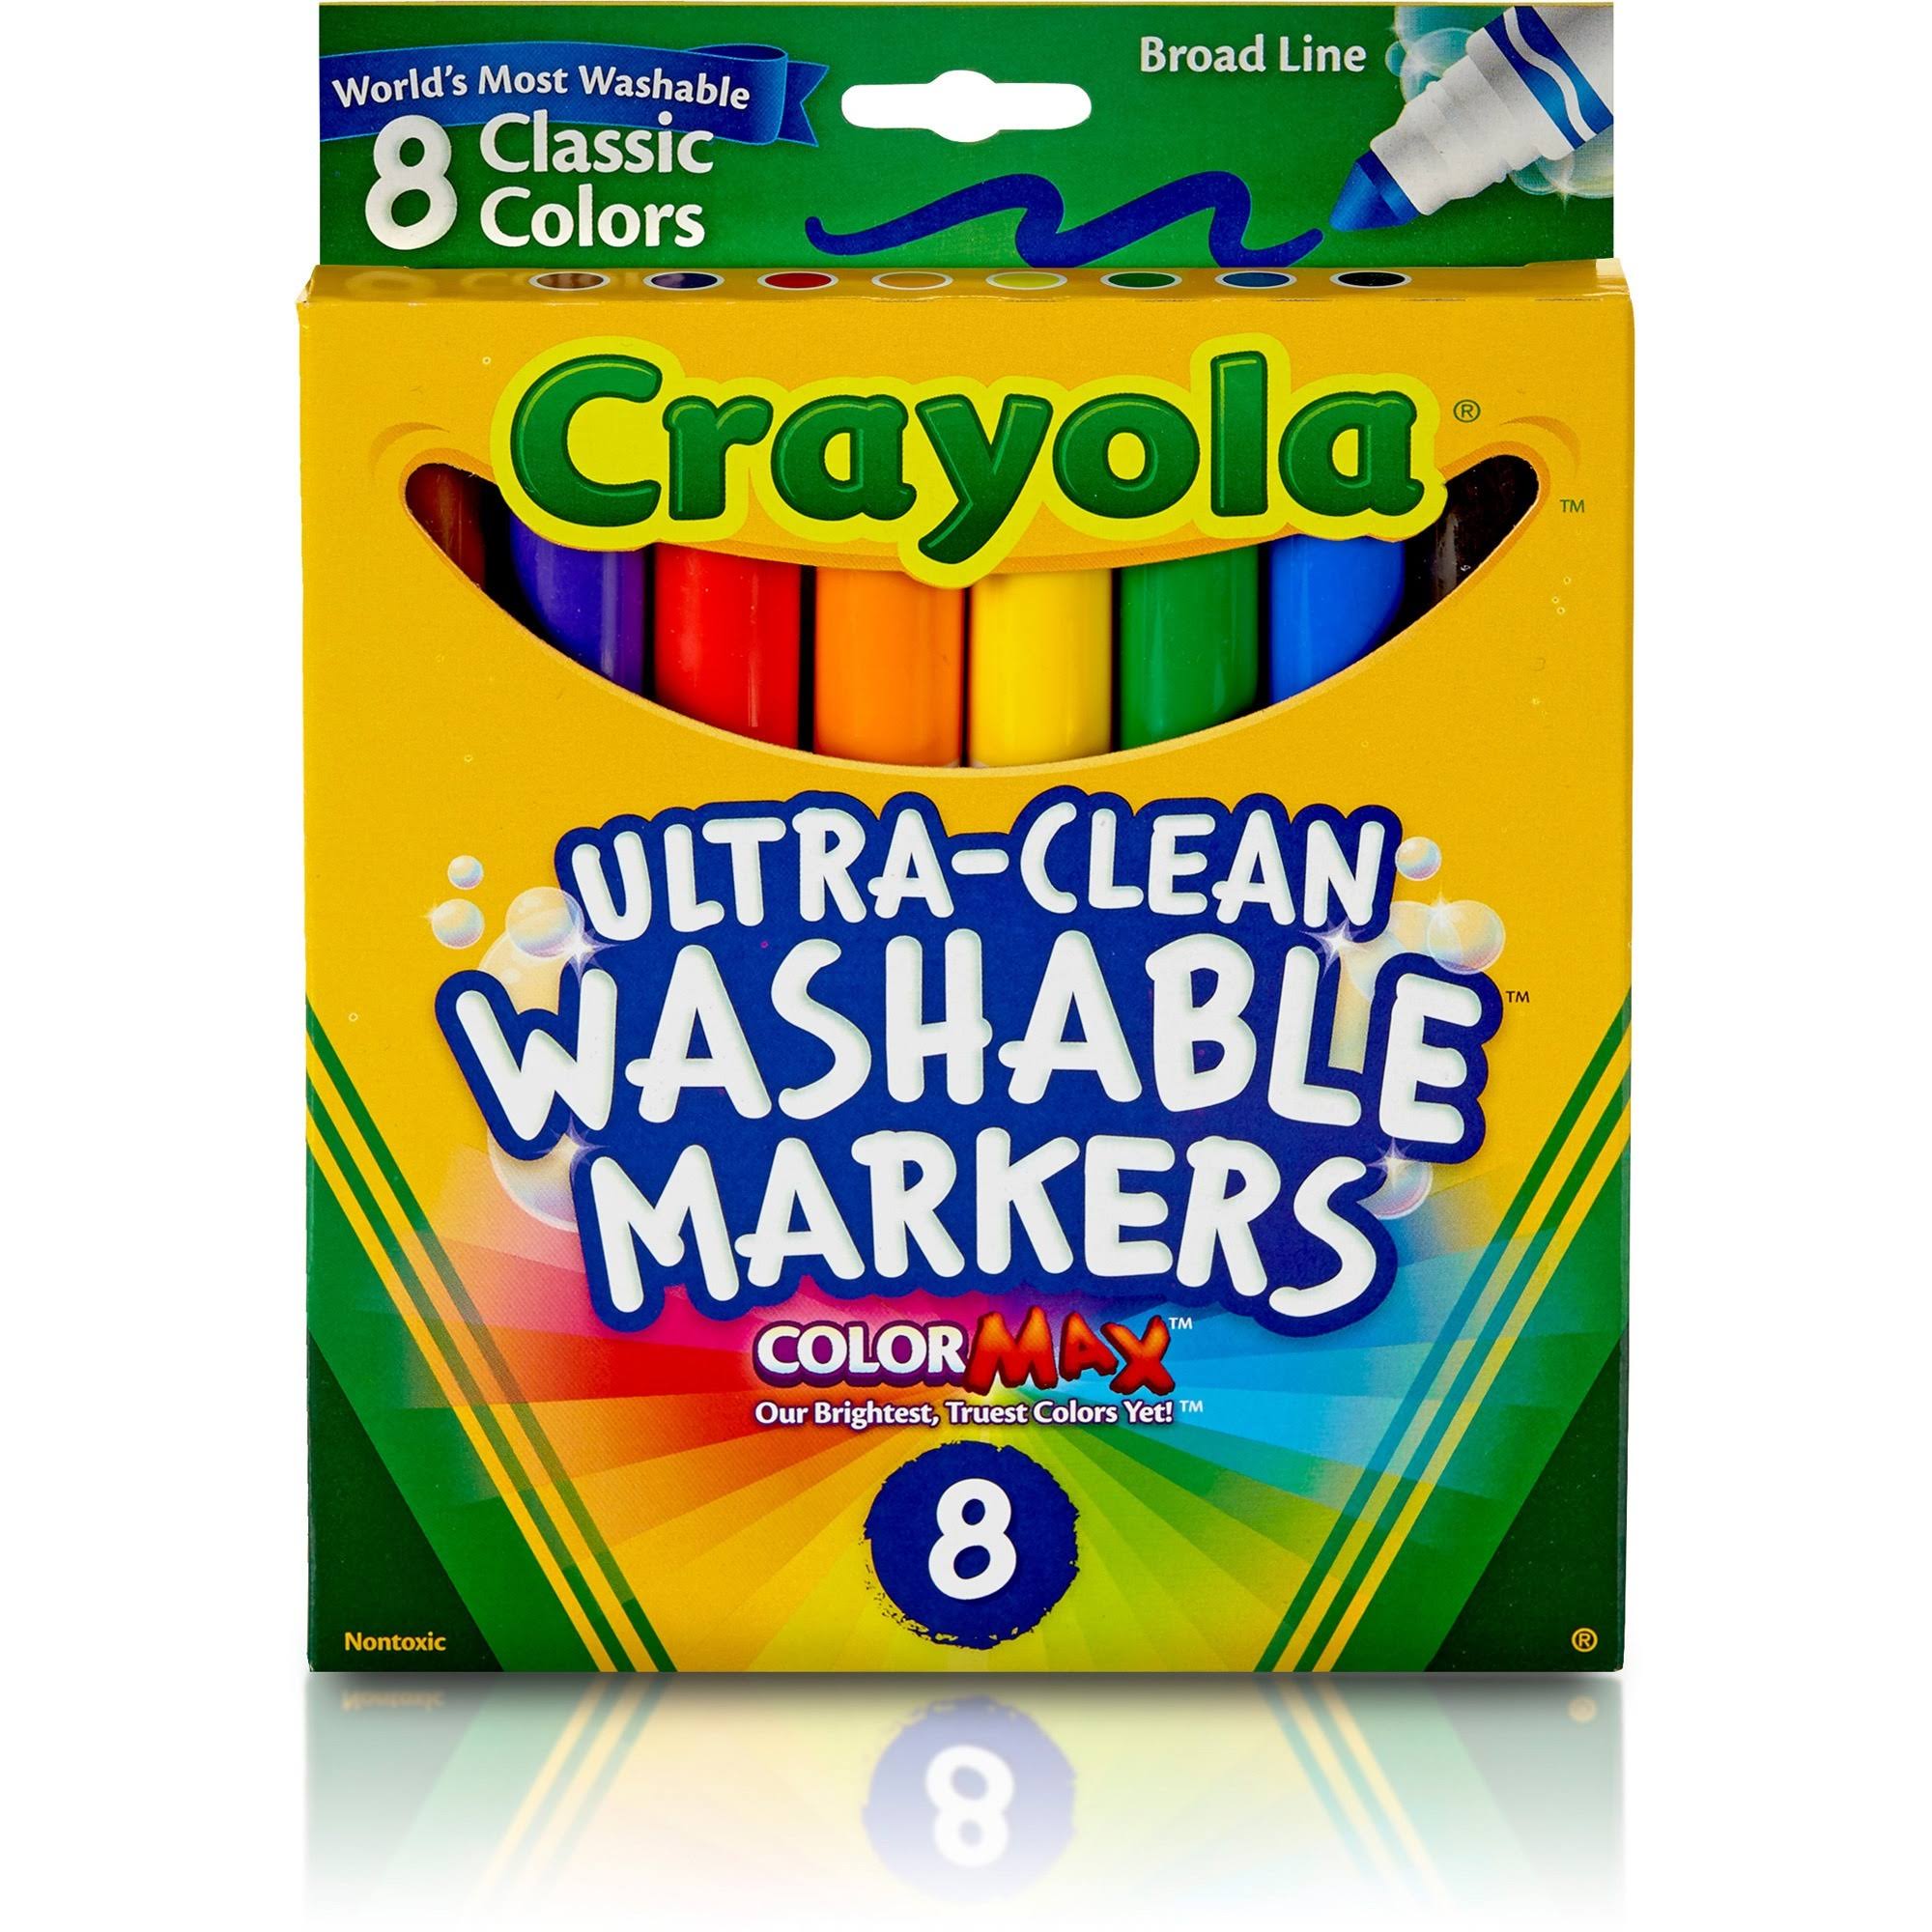 Crayola Washable Markers - 8 Classic Colors